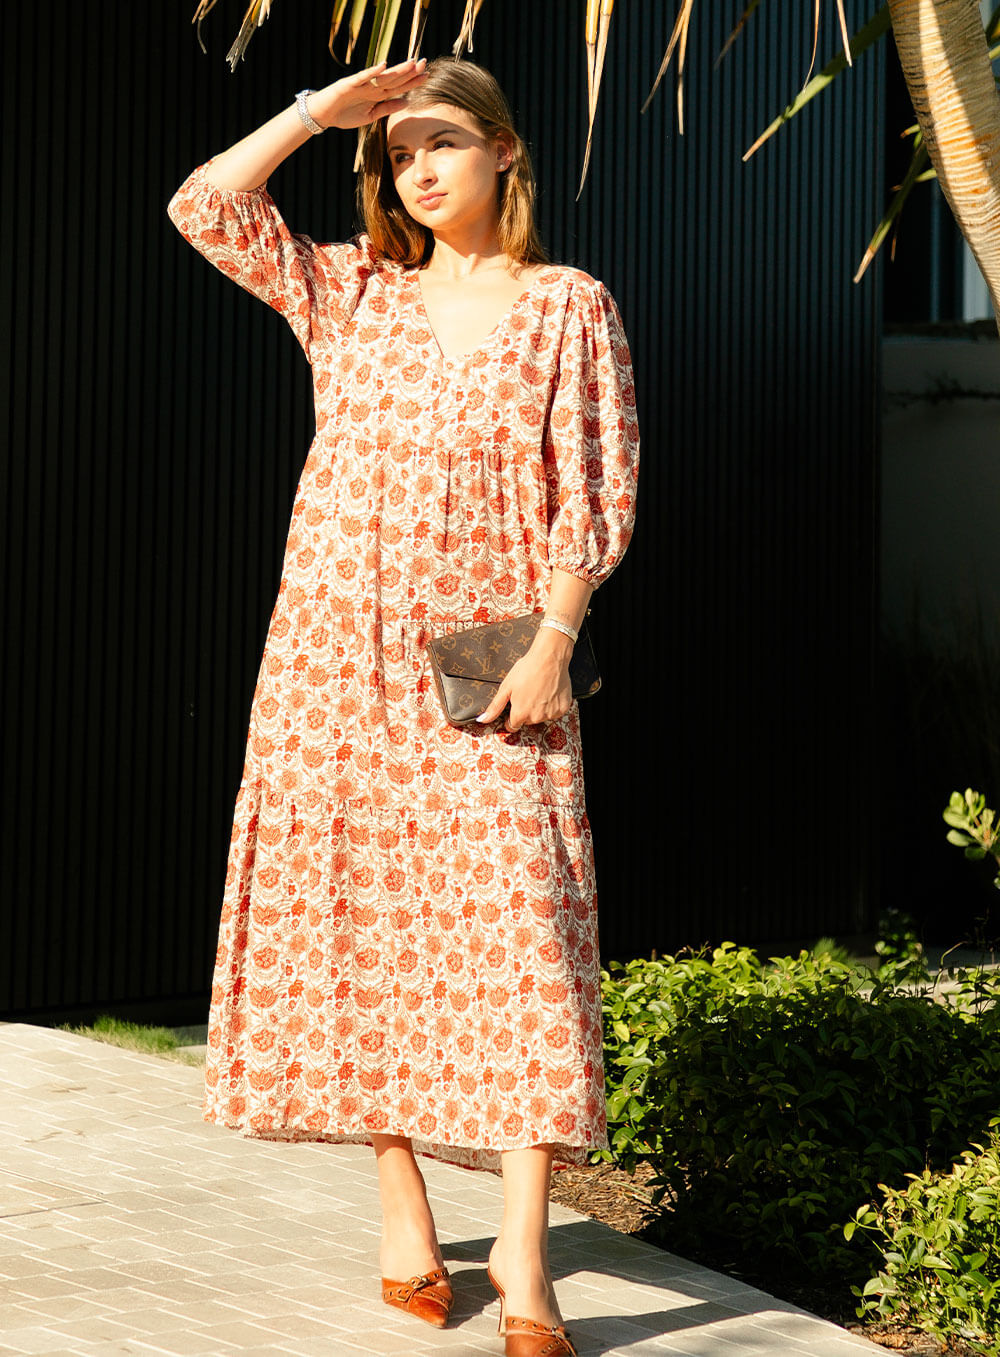 The Charlize linen dress has an all over brownie red print on a cream coloured background. It's lined, elasticated Sleeve, tiered style and front bodice detailing